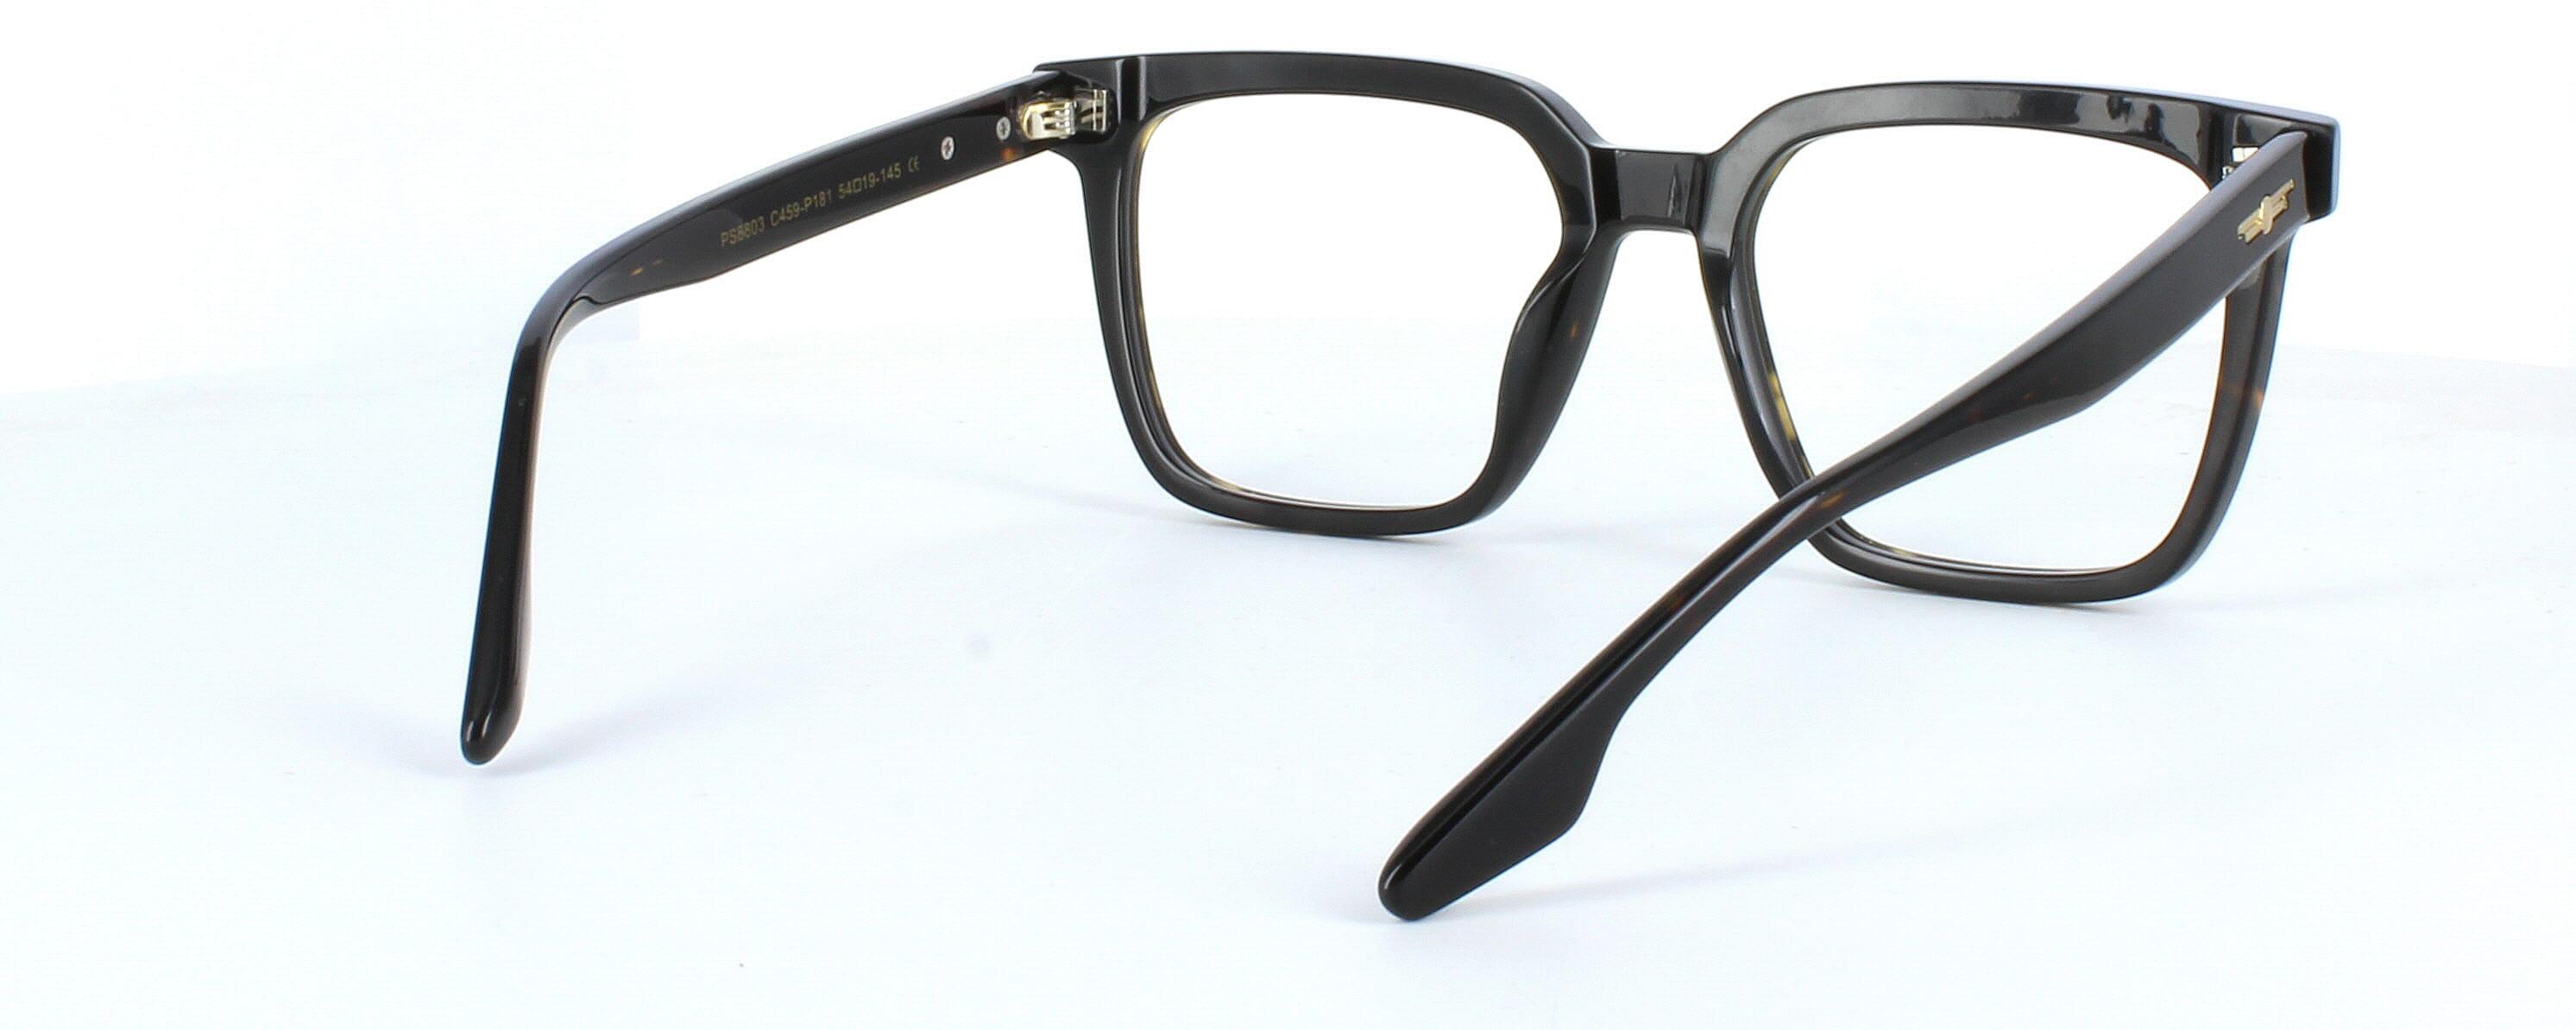 Edward Scotts PS8803 - Brown - Gent's bold statement acetate frame with square shaped lenses - image view 5